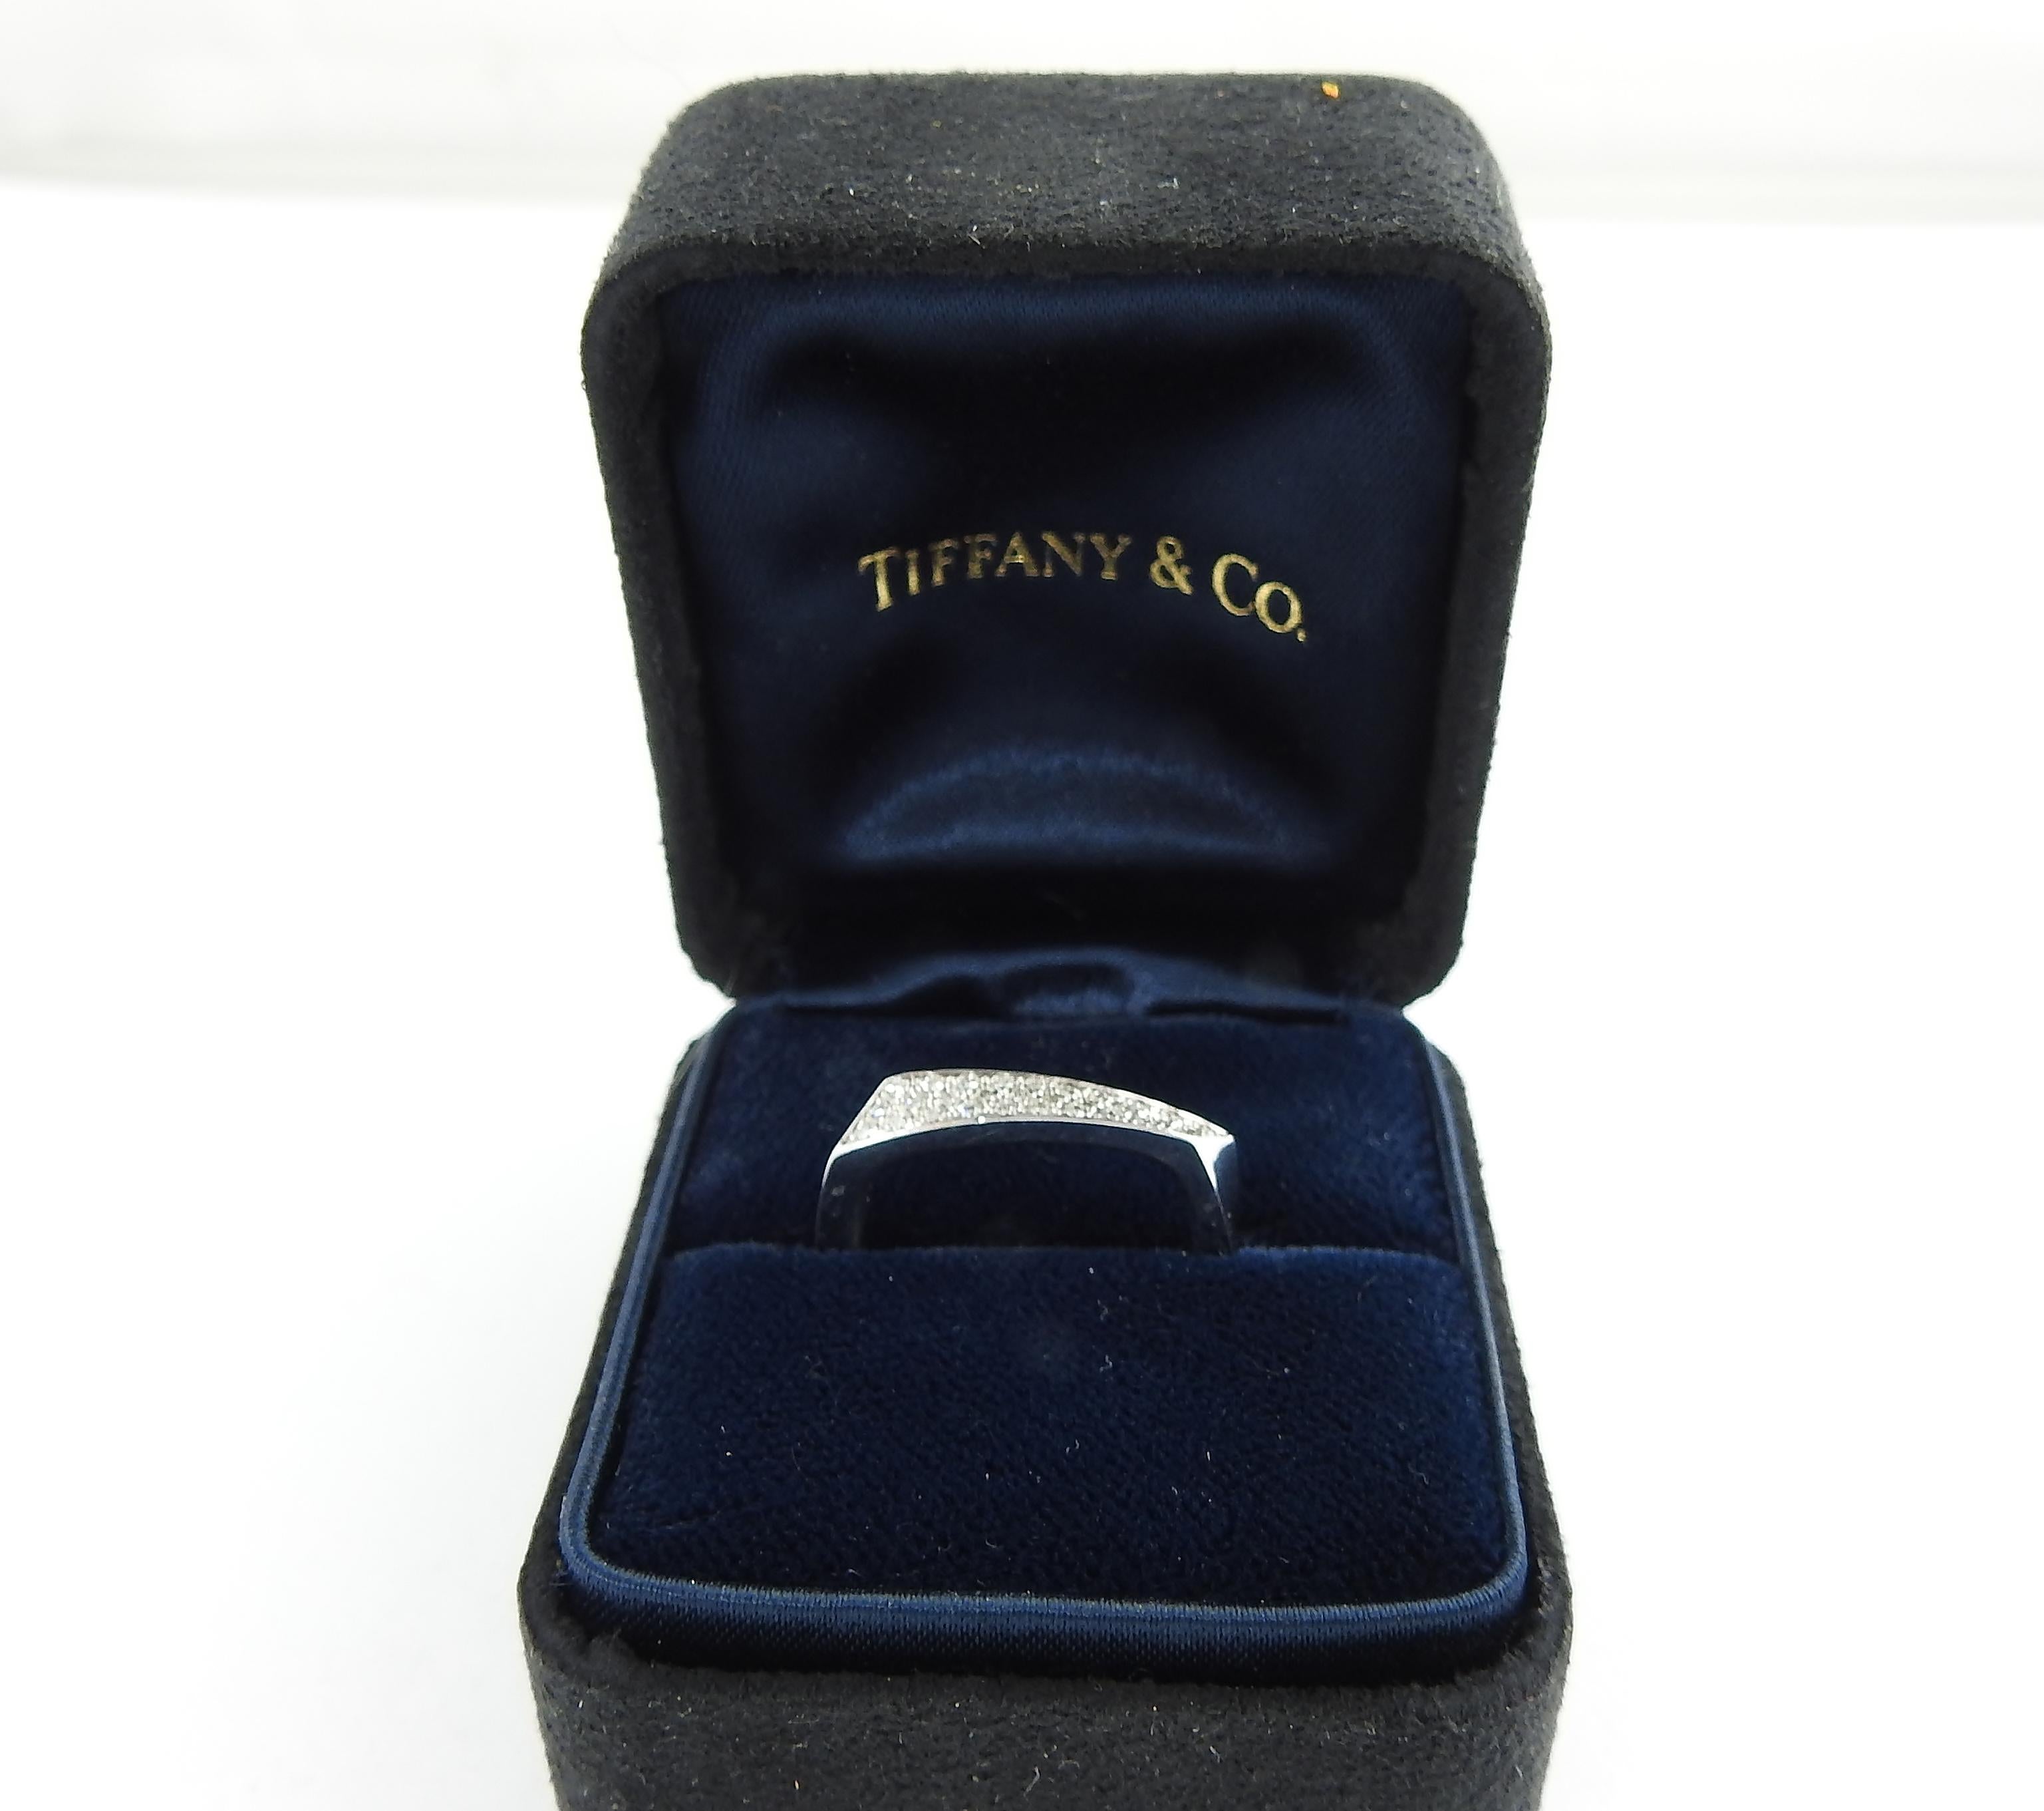 Tiffany & Co. Frank Gehry 18K White Gold Diamond Torque Ring Size 6.5 Box 4